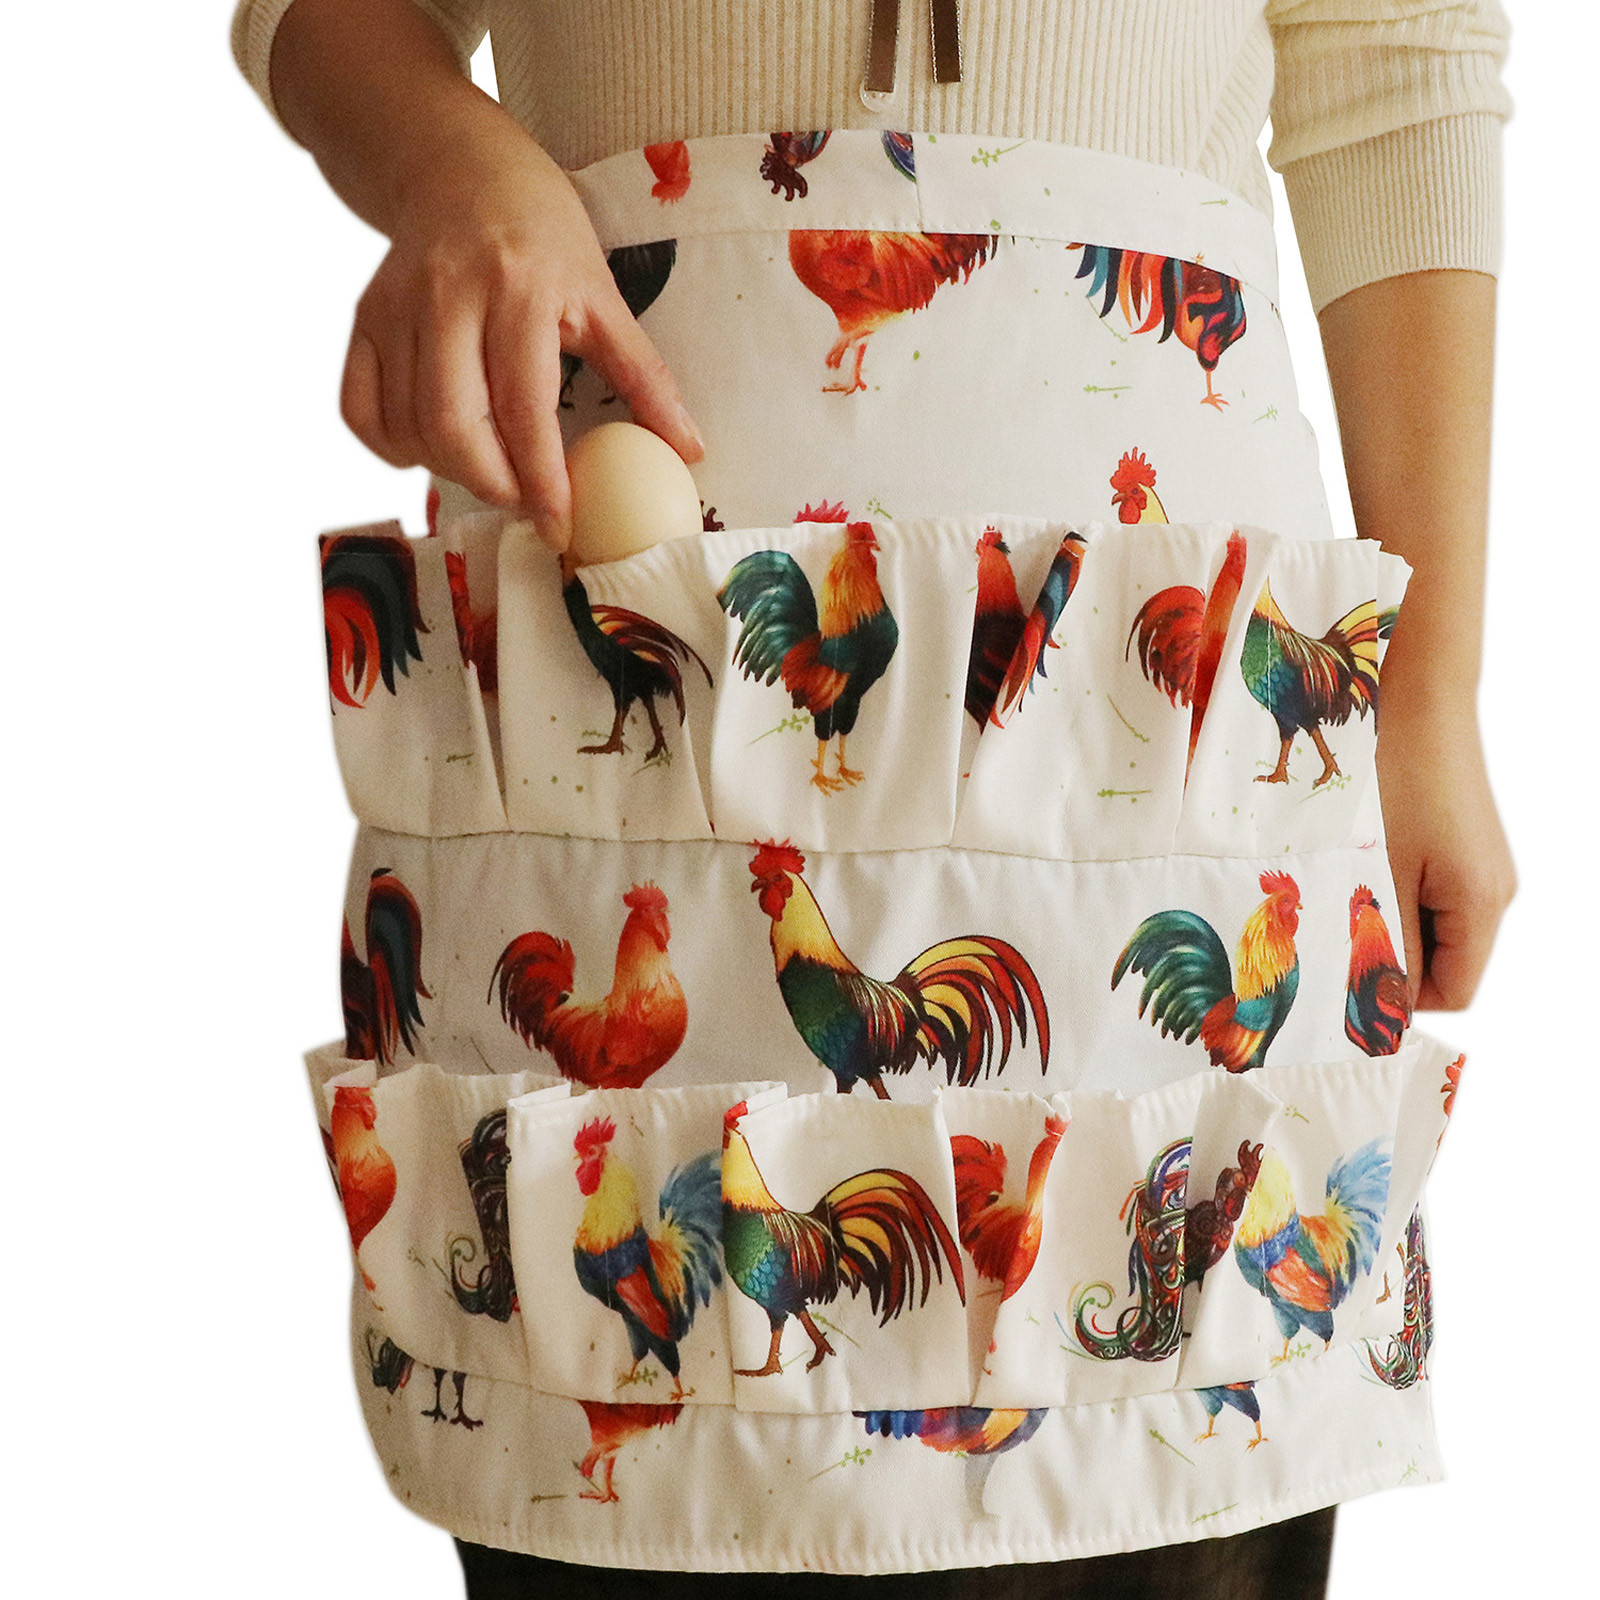 

1 Pack, Pockets Egg Collecting Harvest Apron Chicken Farm Work Aprons Carry Duck Goose Egg Collecting Farm Apron Kitchen Garden Aprons